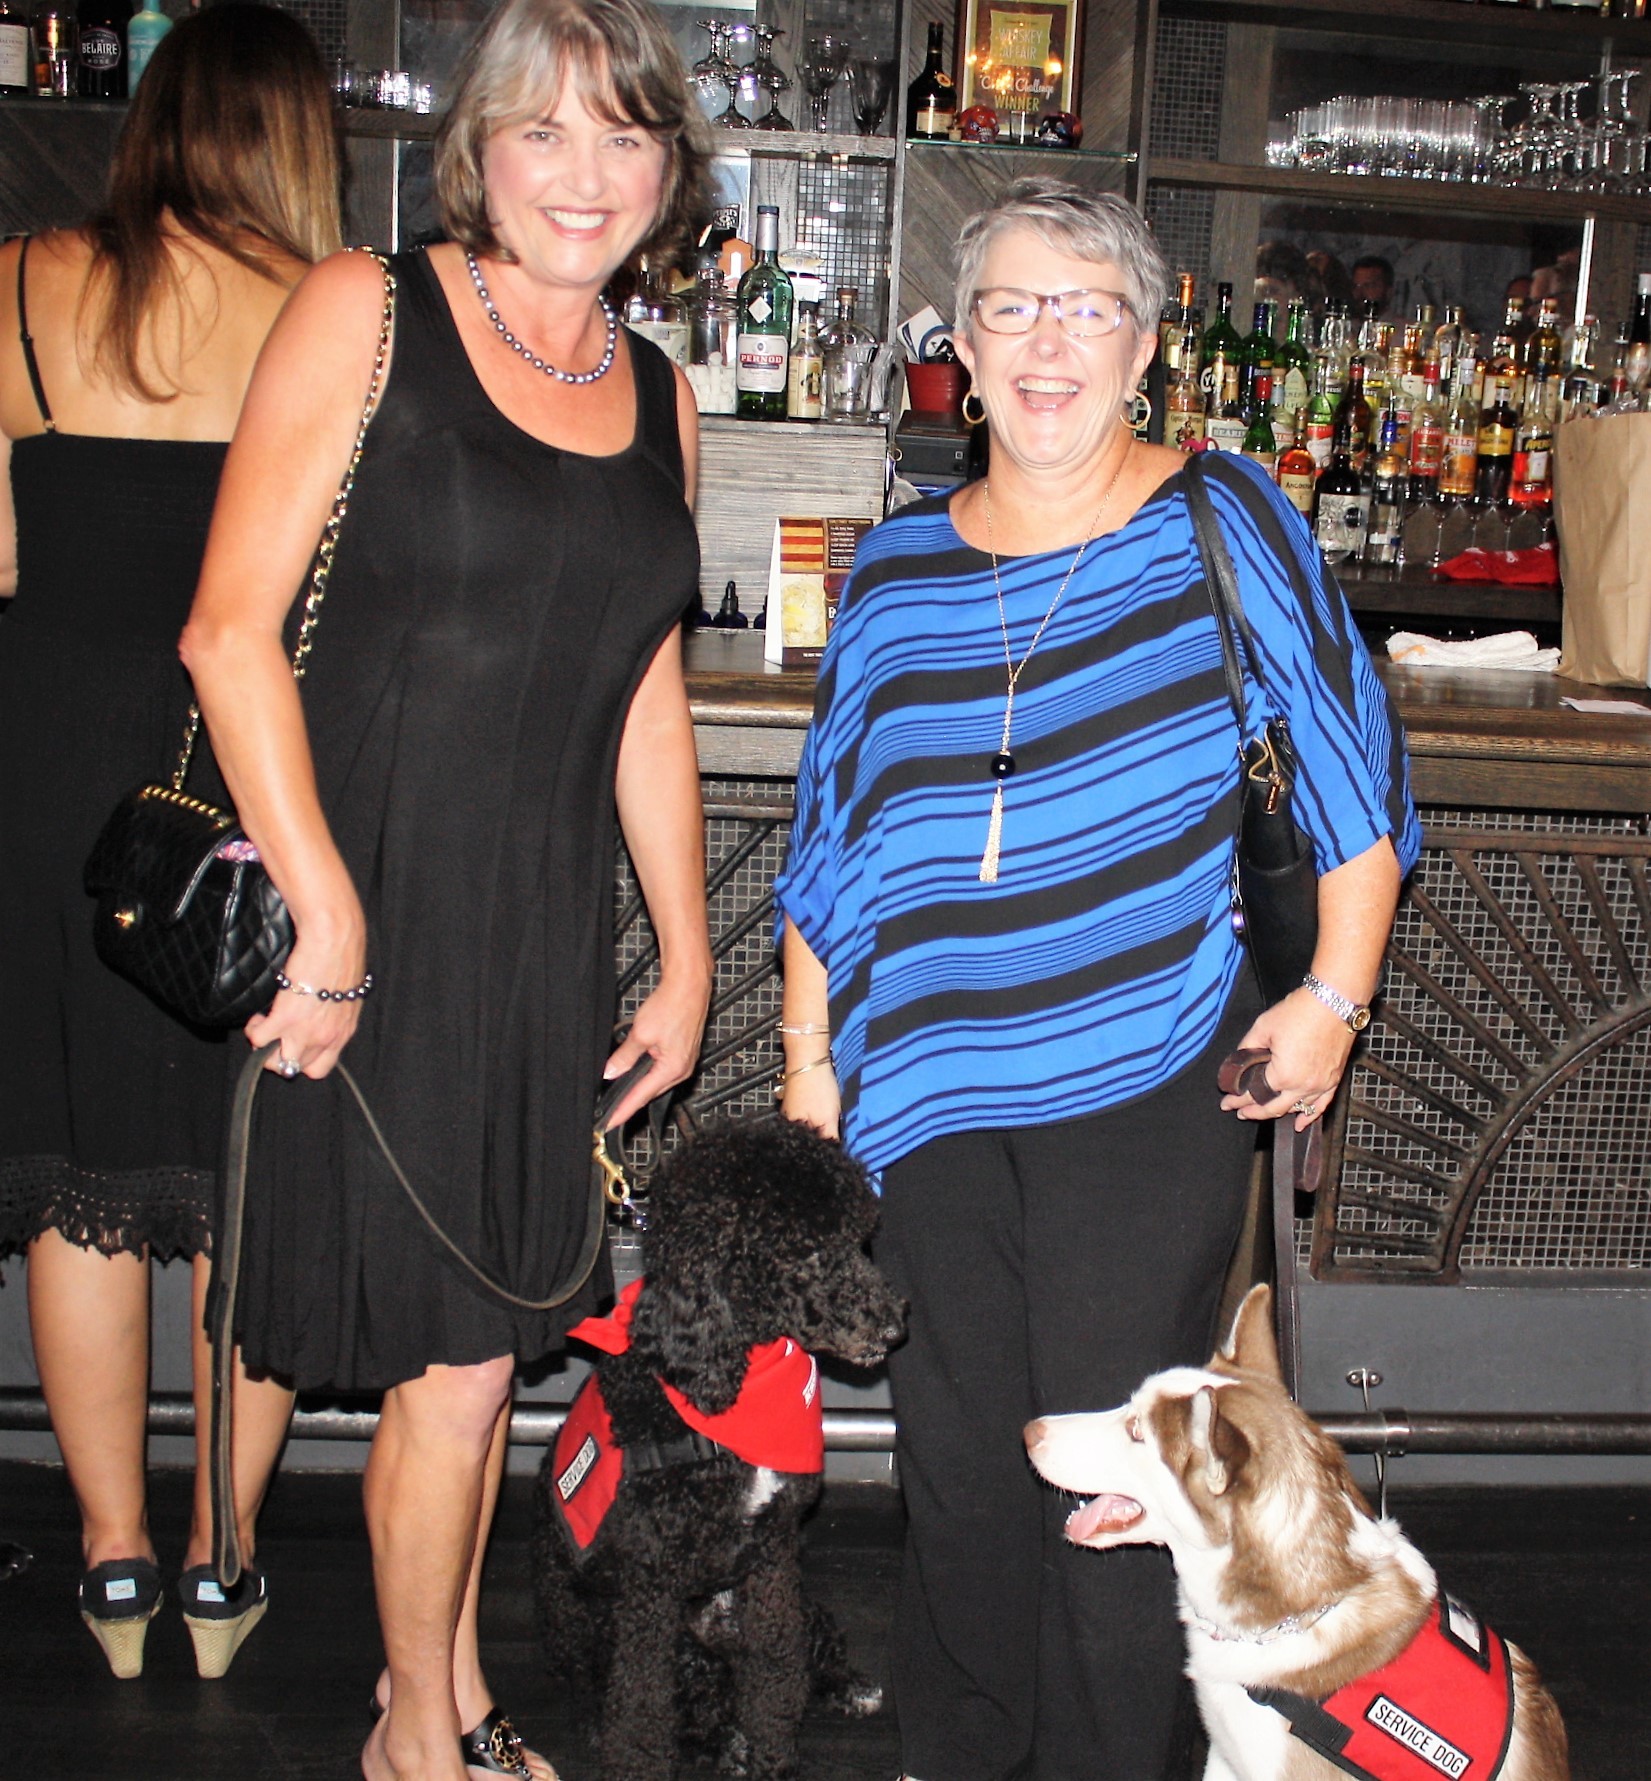 Barbara Jennings and service dog Victory with Mary Daniel and service dog Delaney